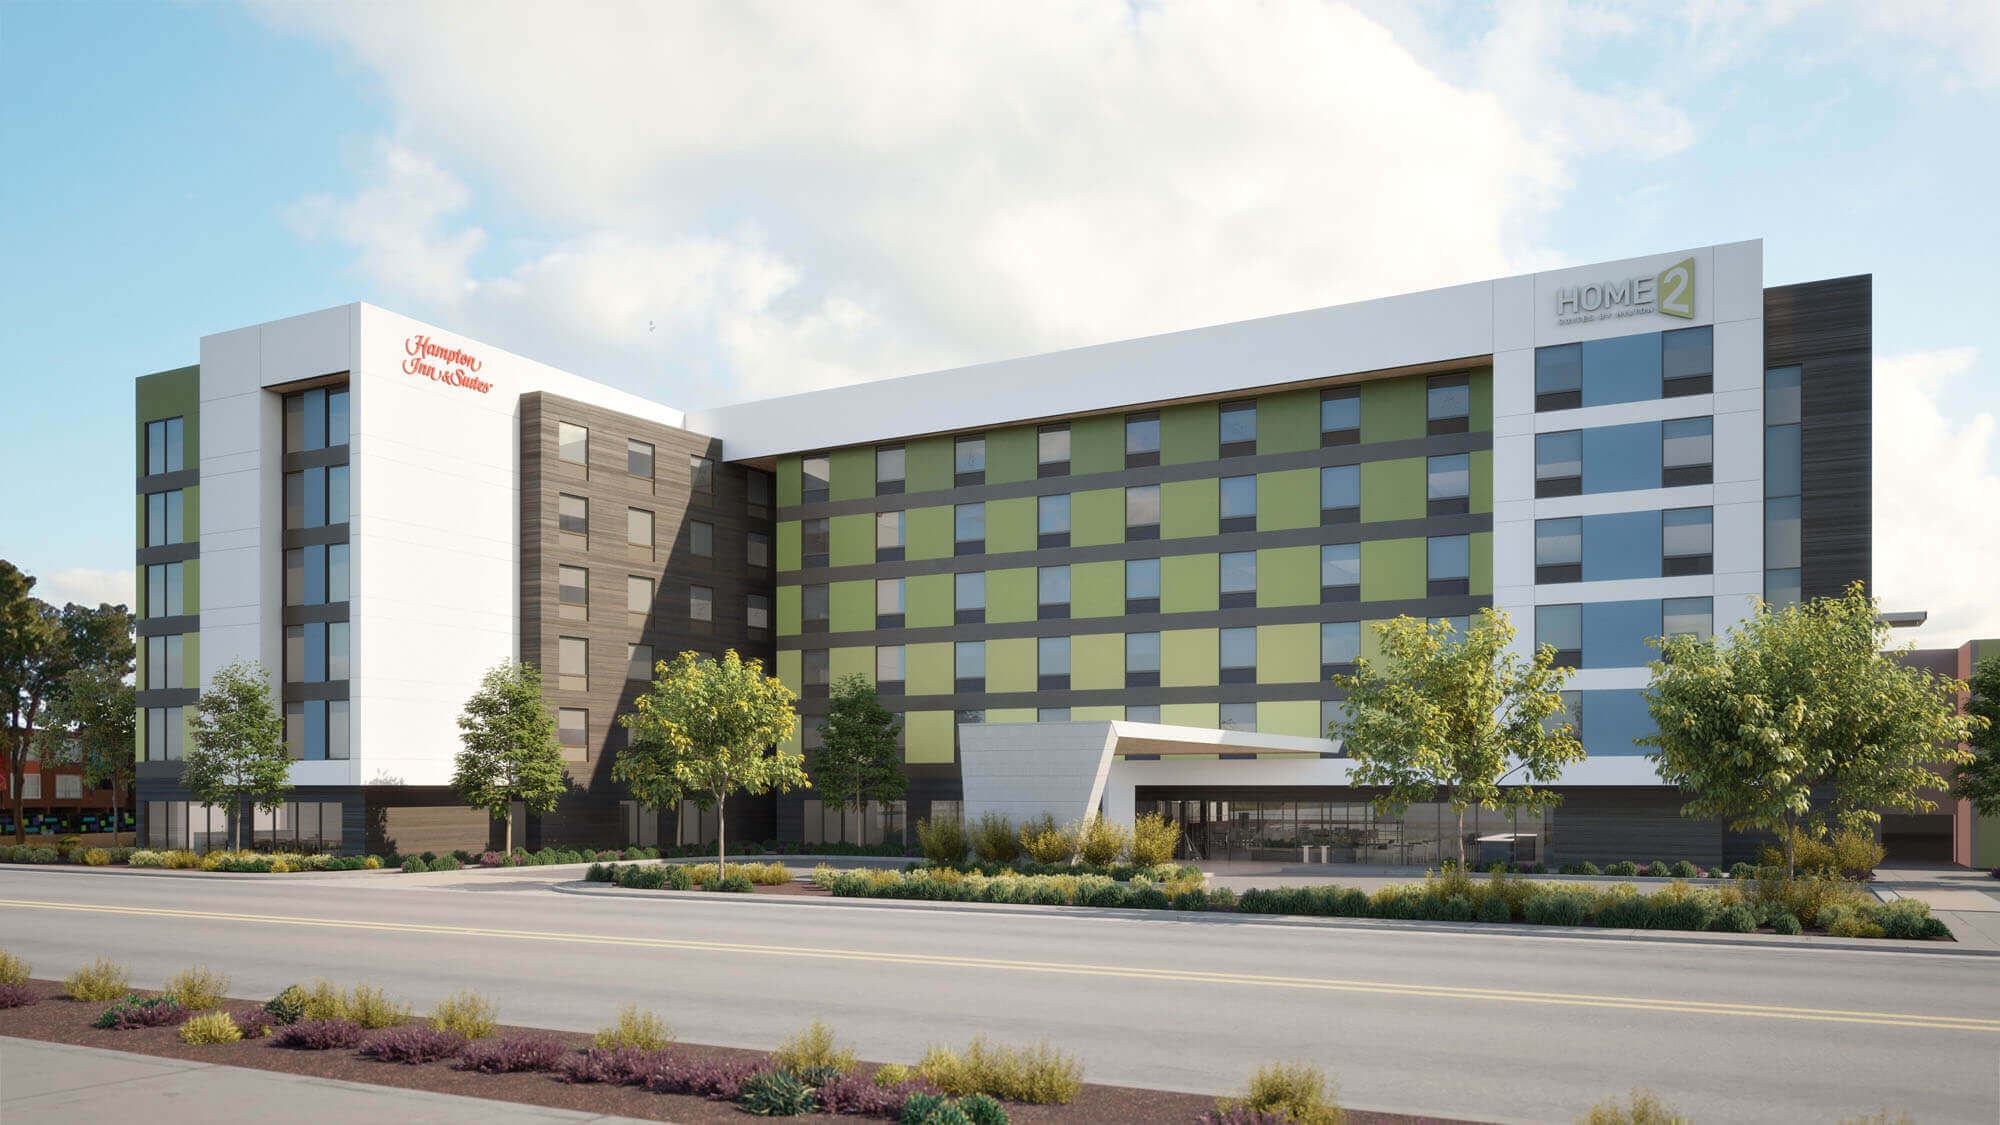 Dual-branded Hampton Inn & Suites and Home2 Suites